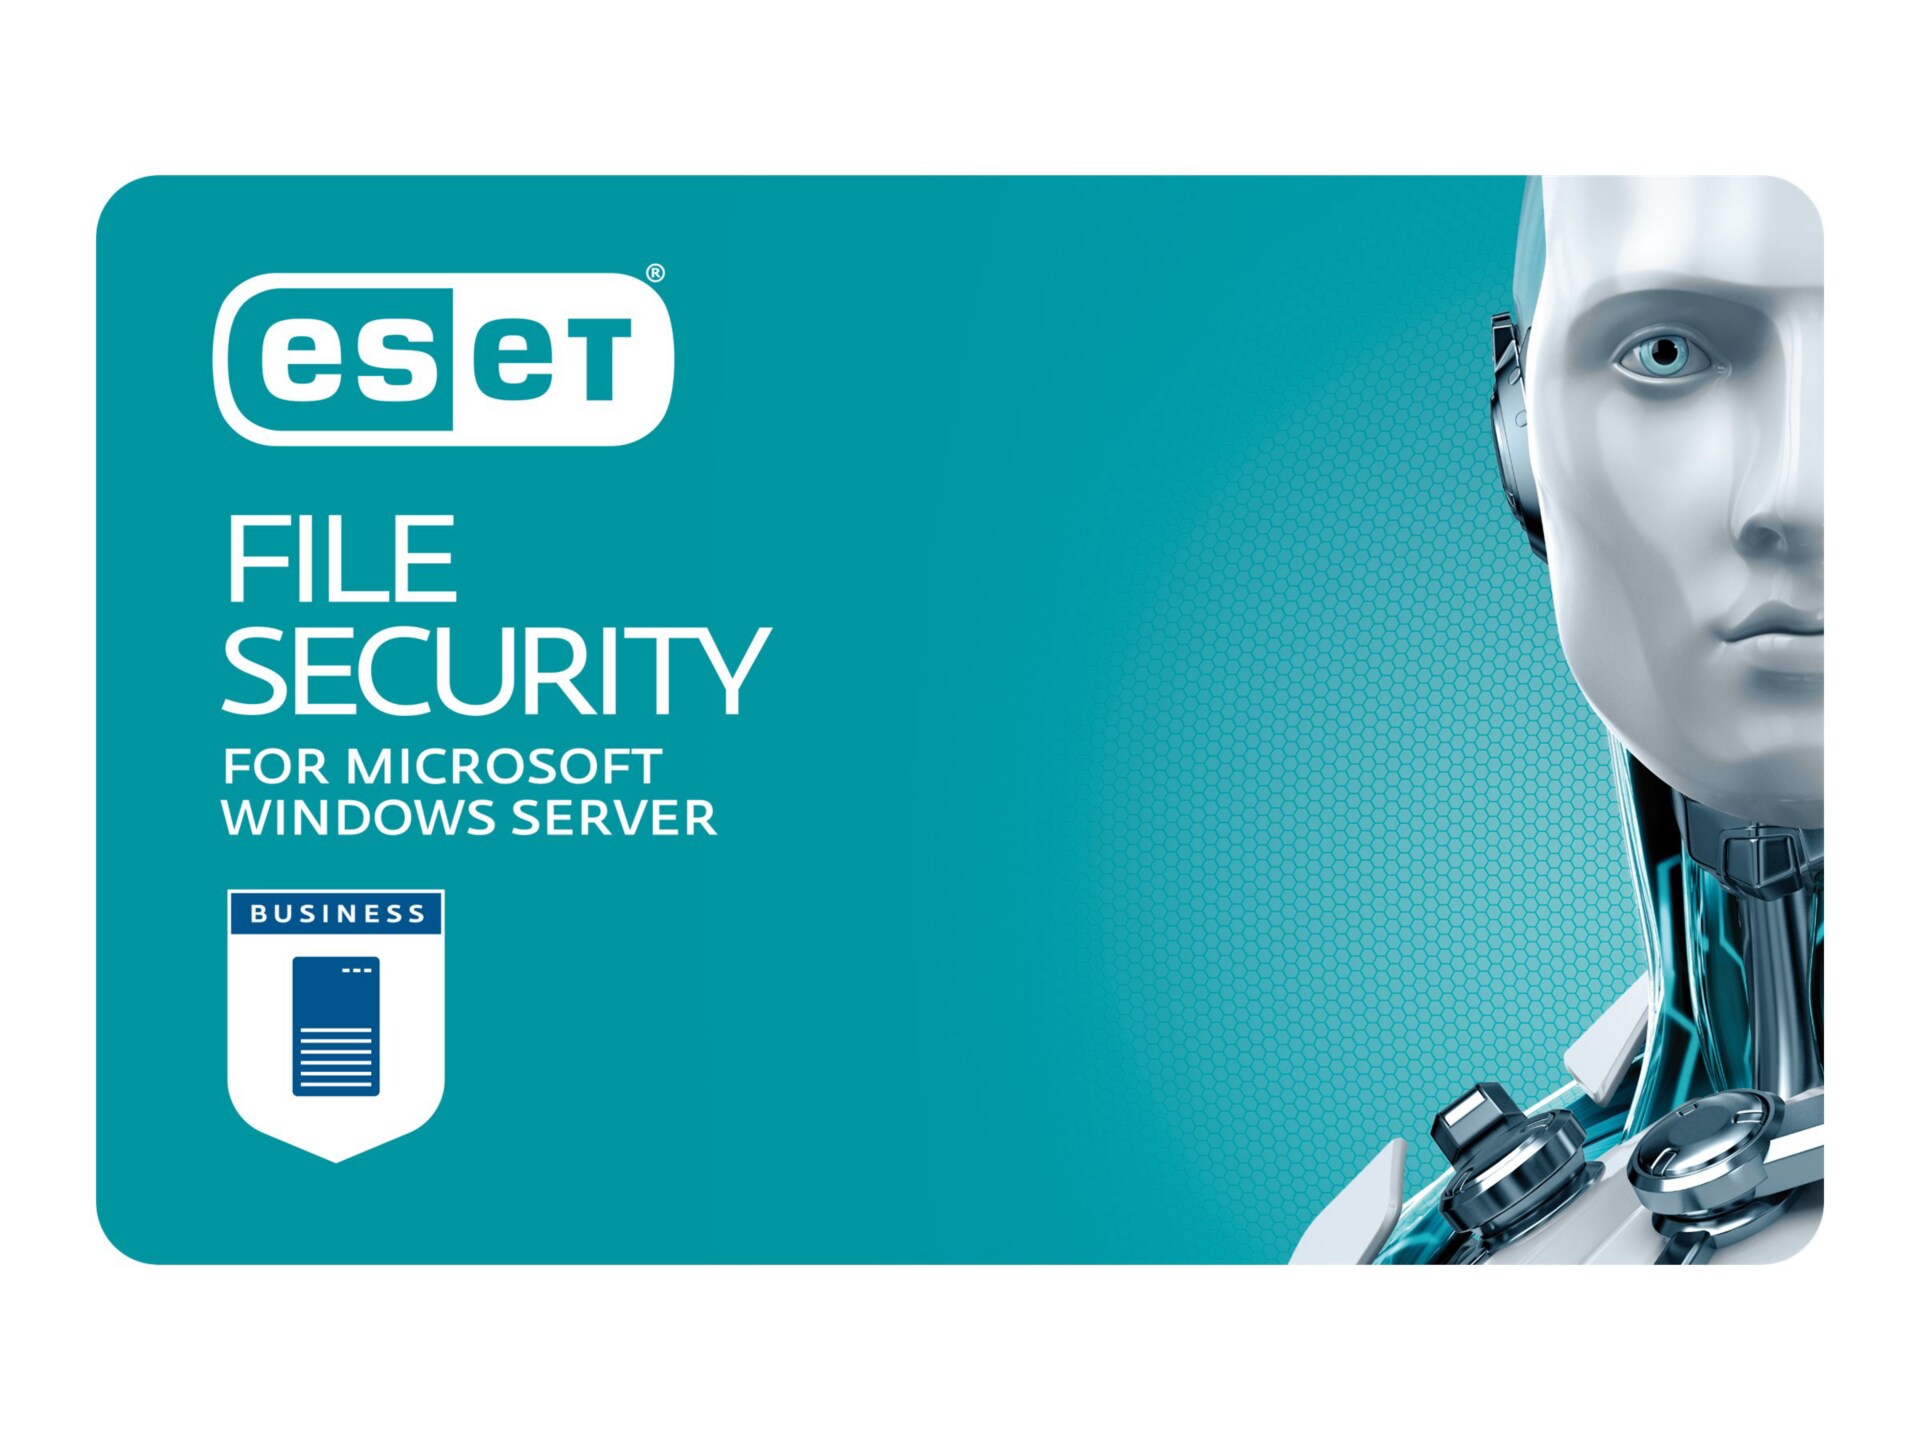 ESET File Security for Microsoft Windows Server - subscription license renewal (3 years) - 1 seat